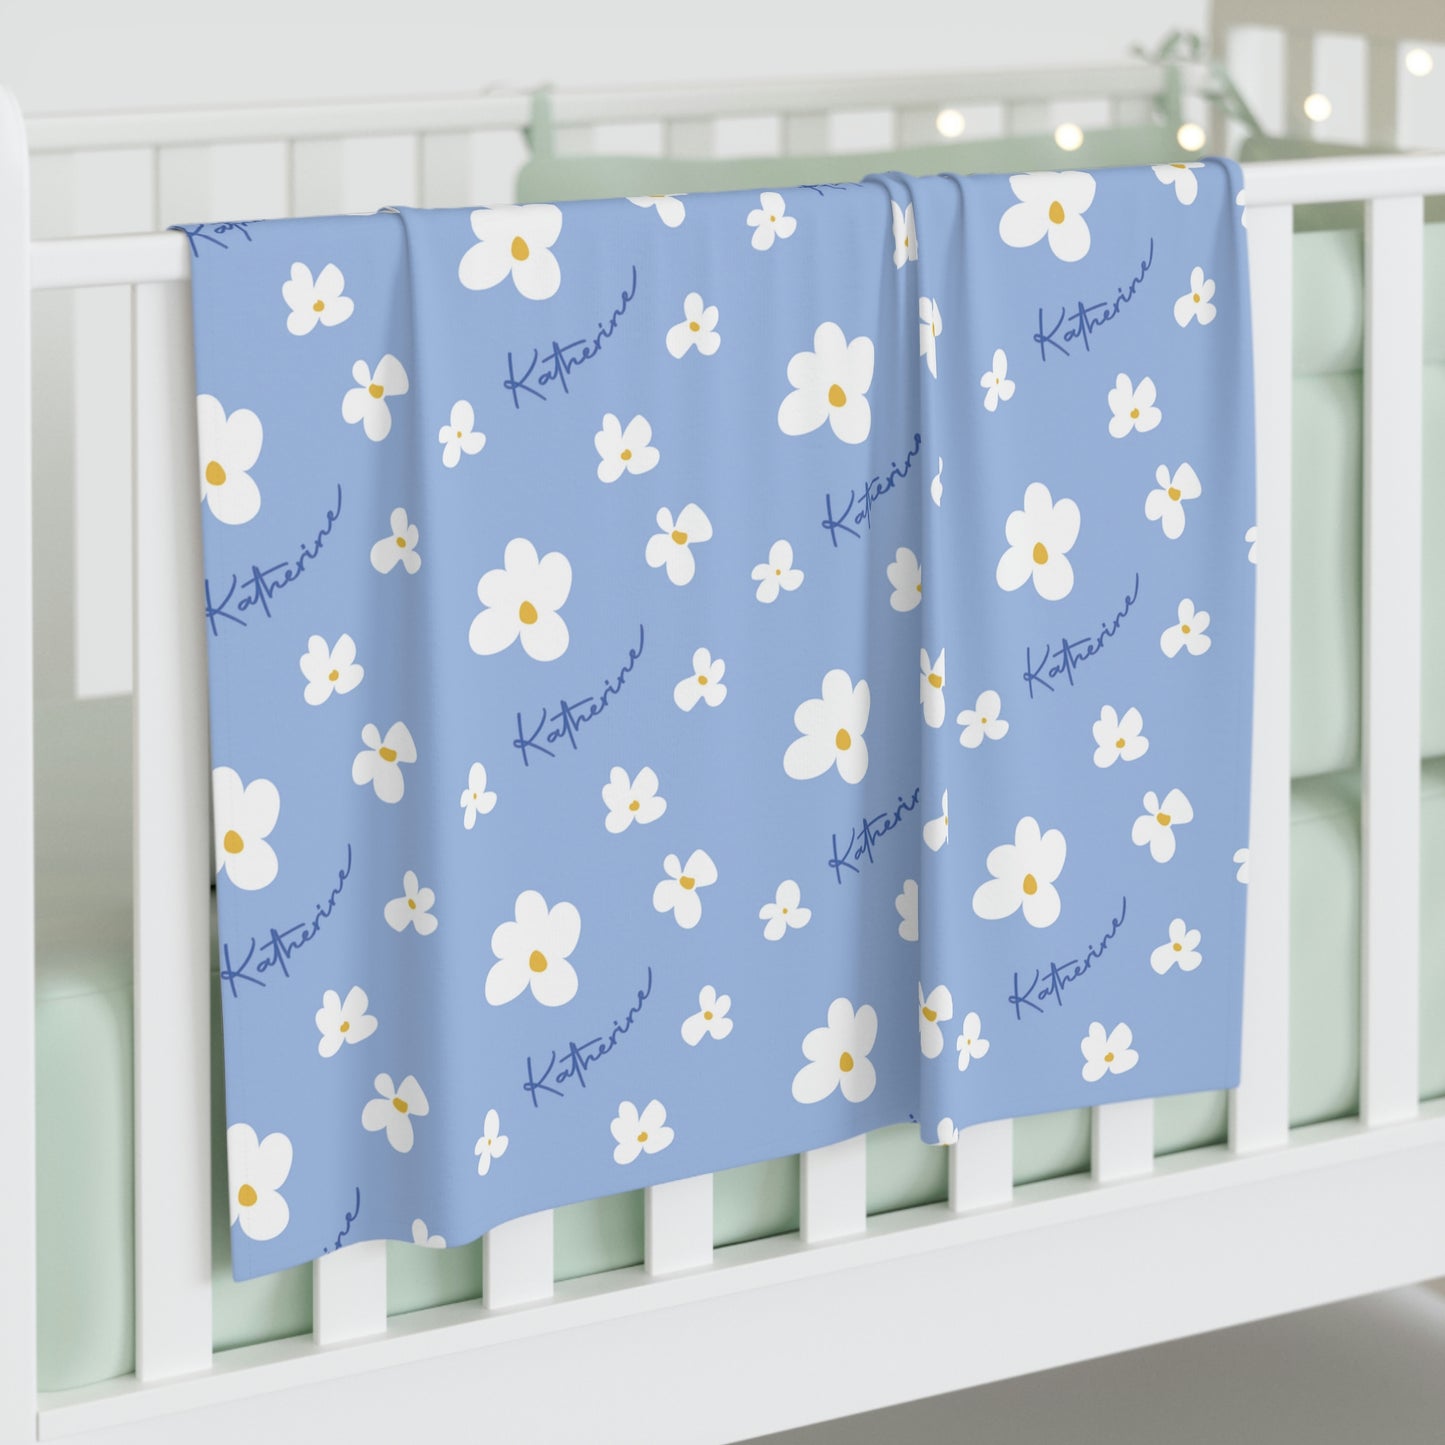 Jersey personalized baby blanket in blue daisy pattern laid flat